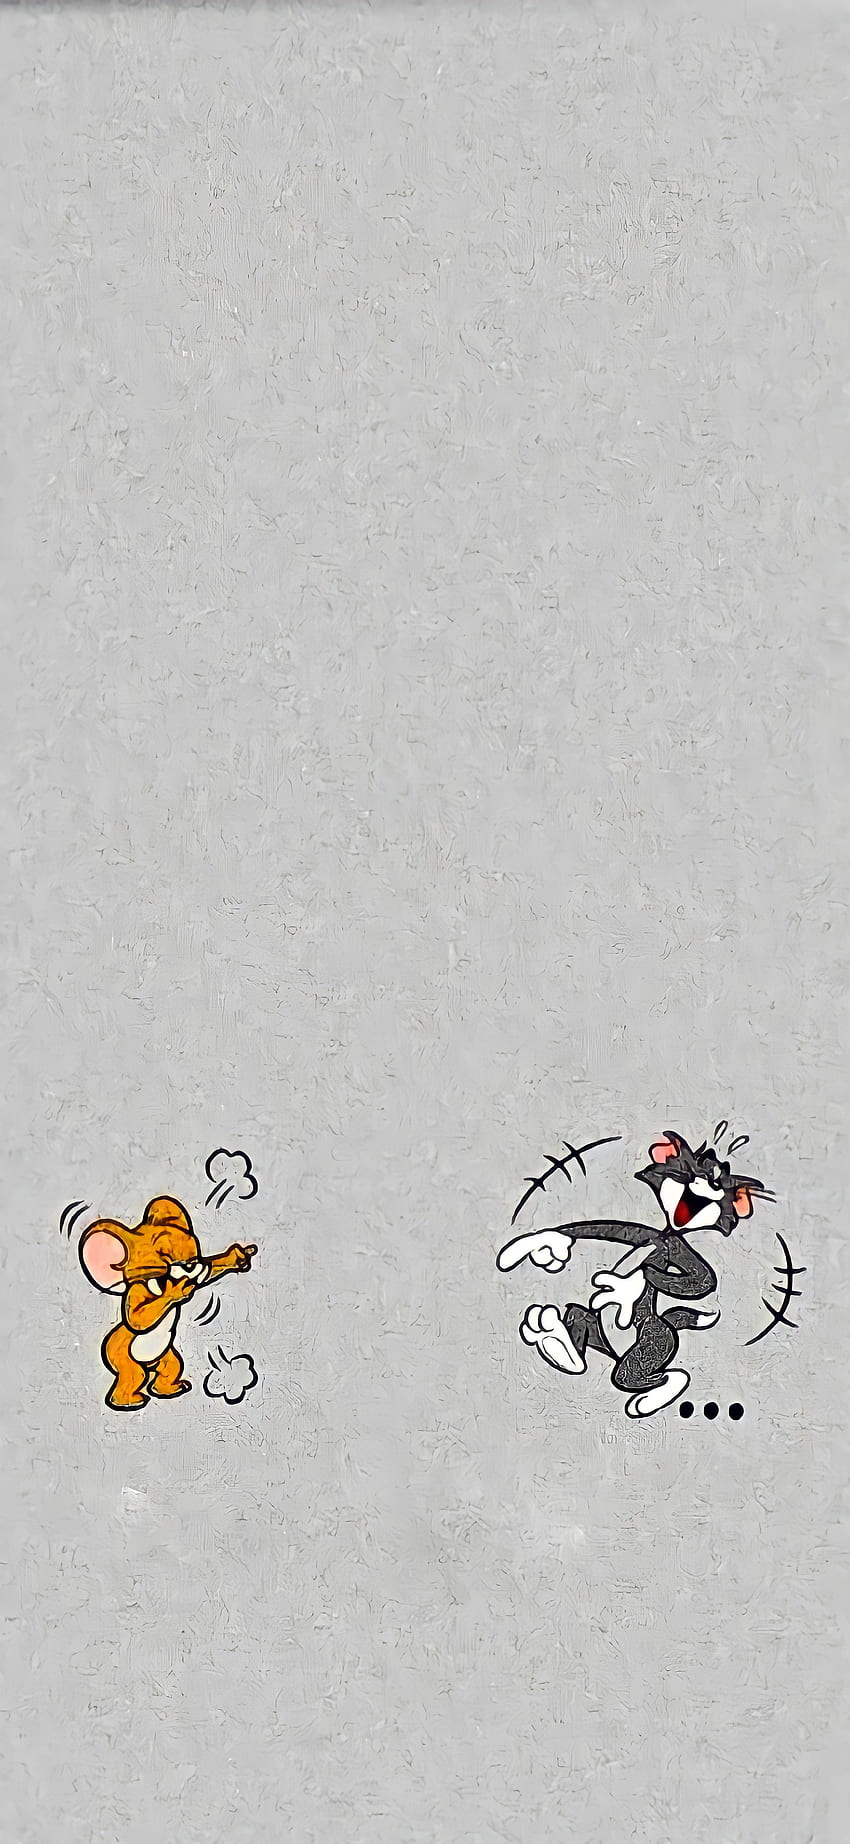 Cartoon characters Tom and Jerry are fighting on a white background - Tom and Jerry